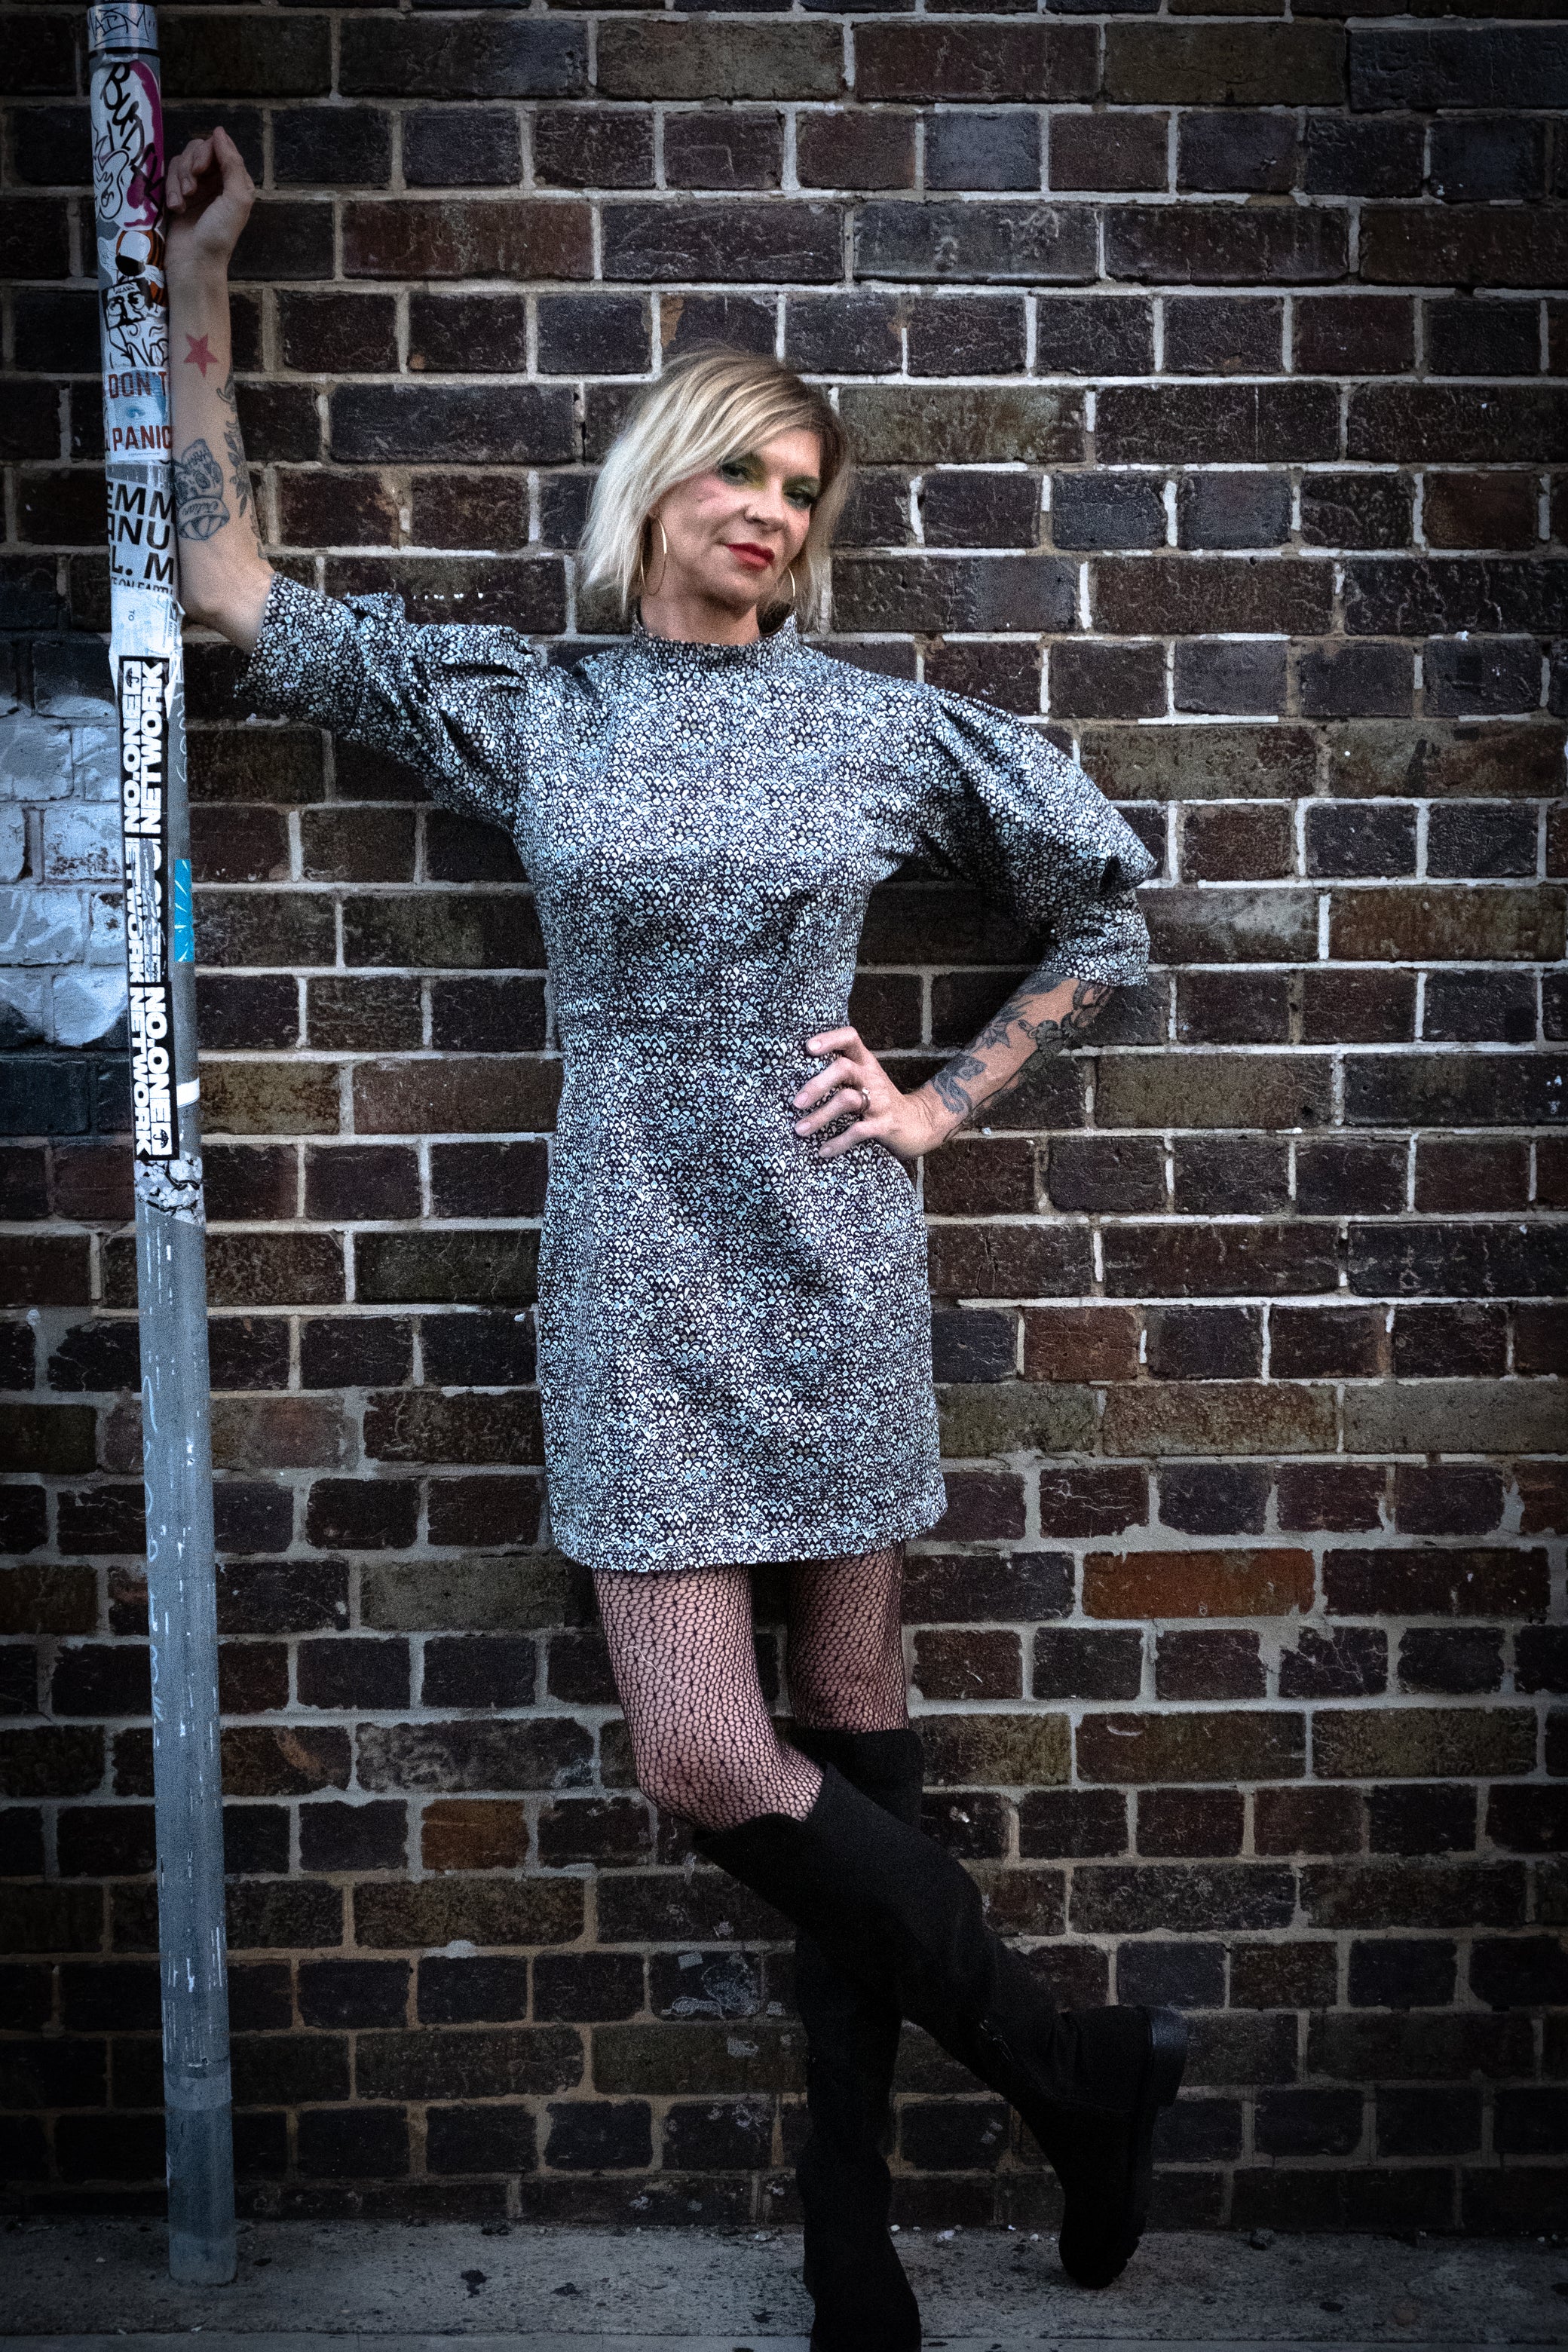 A model leaning on a pole wearing a high neck, puffy sleeve grey toned dress with black high knee boots